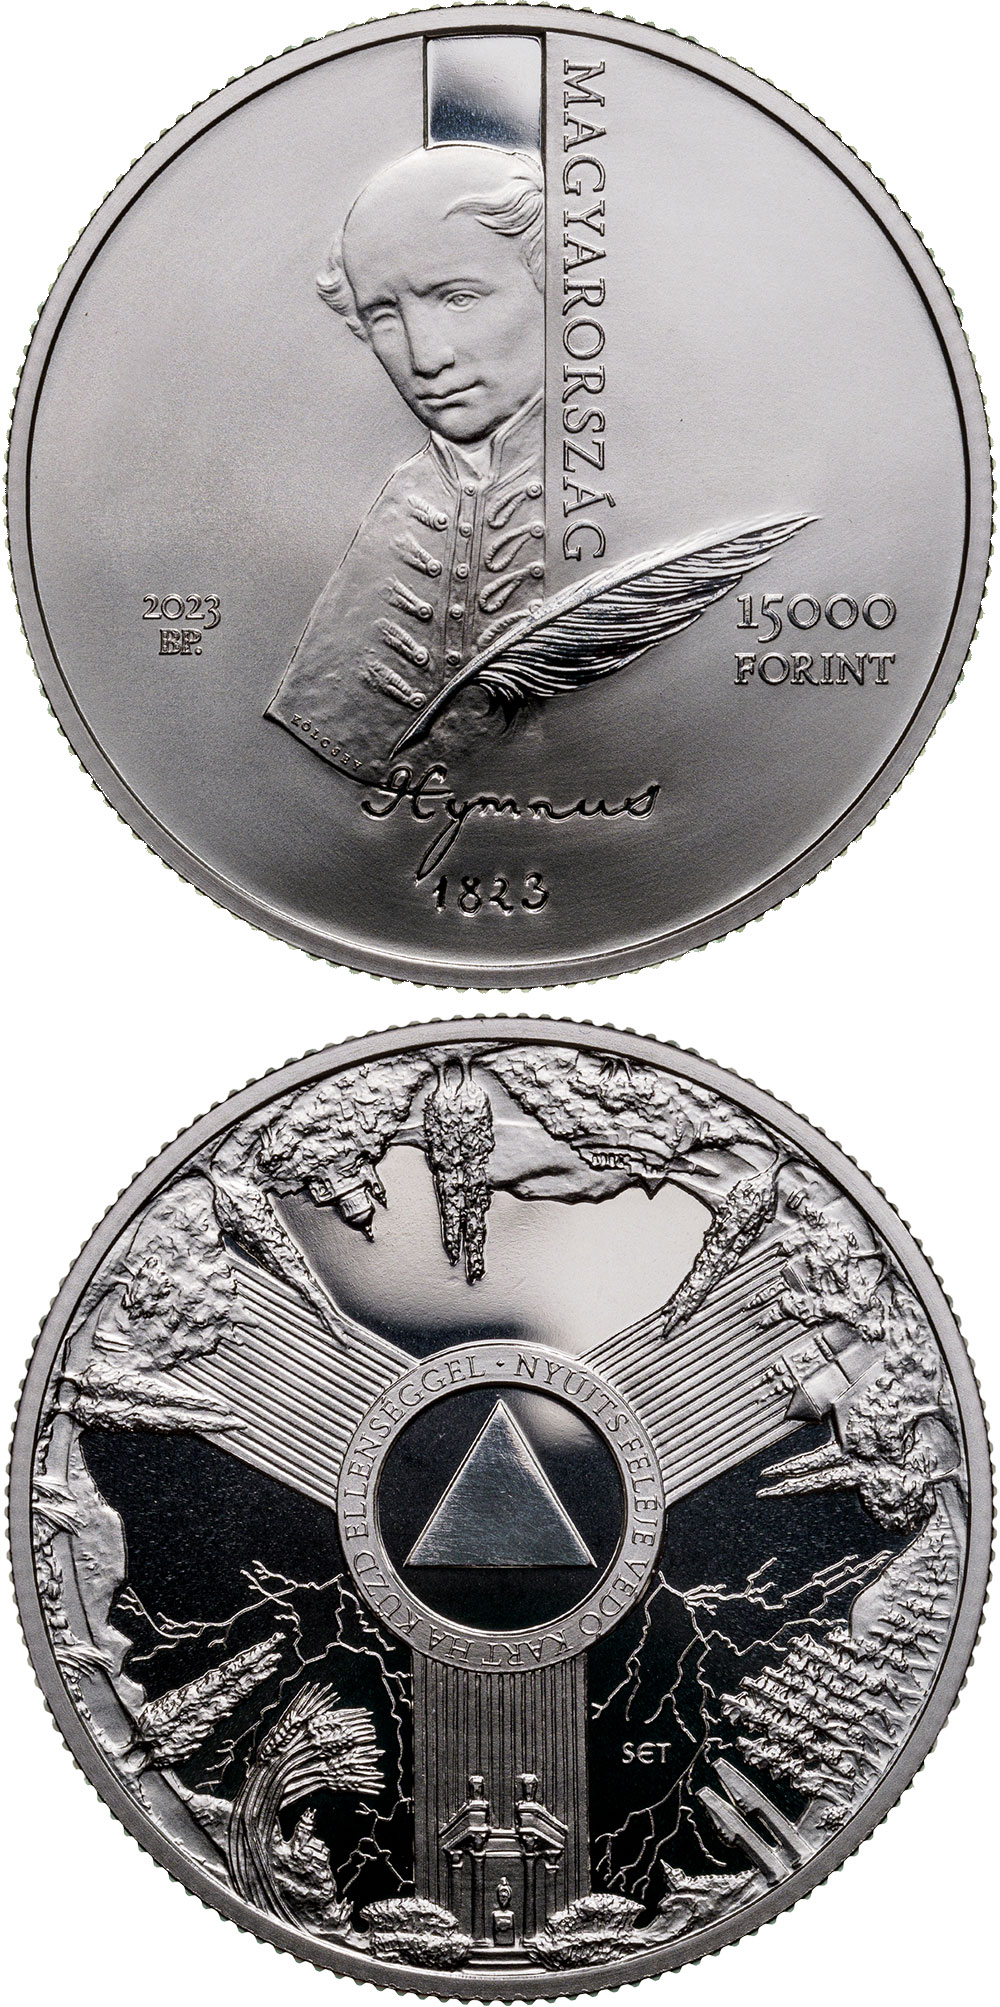 Image of 15000 forint coin - 200th anniversary of the writing of the poem Hymn | Hungary 2023.  The Silver coin is of Proof quality.